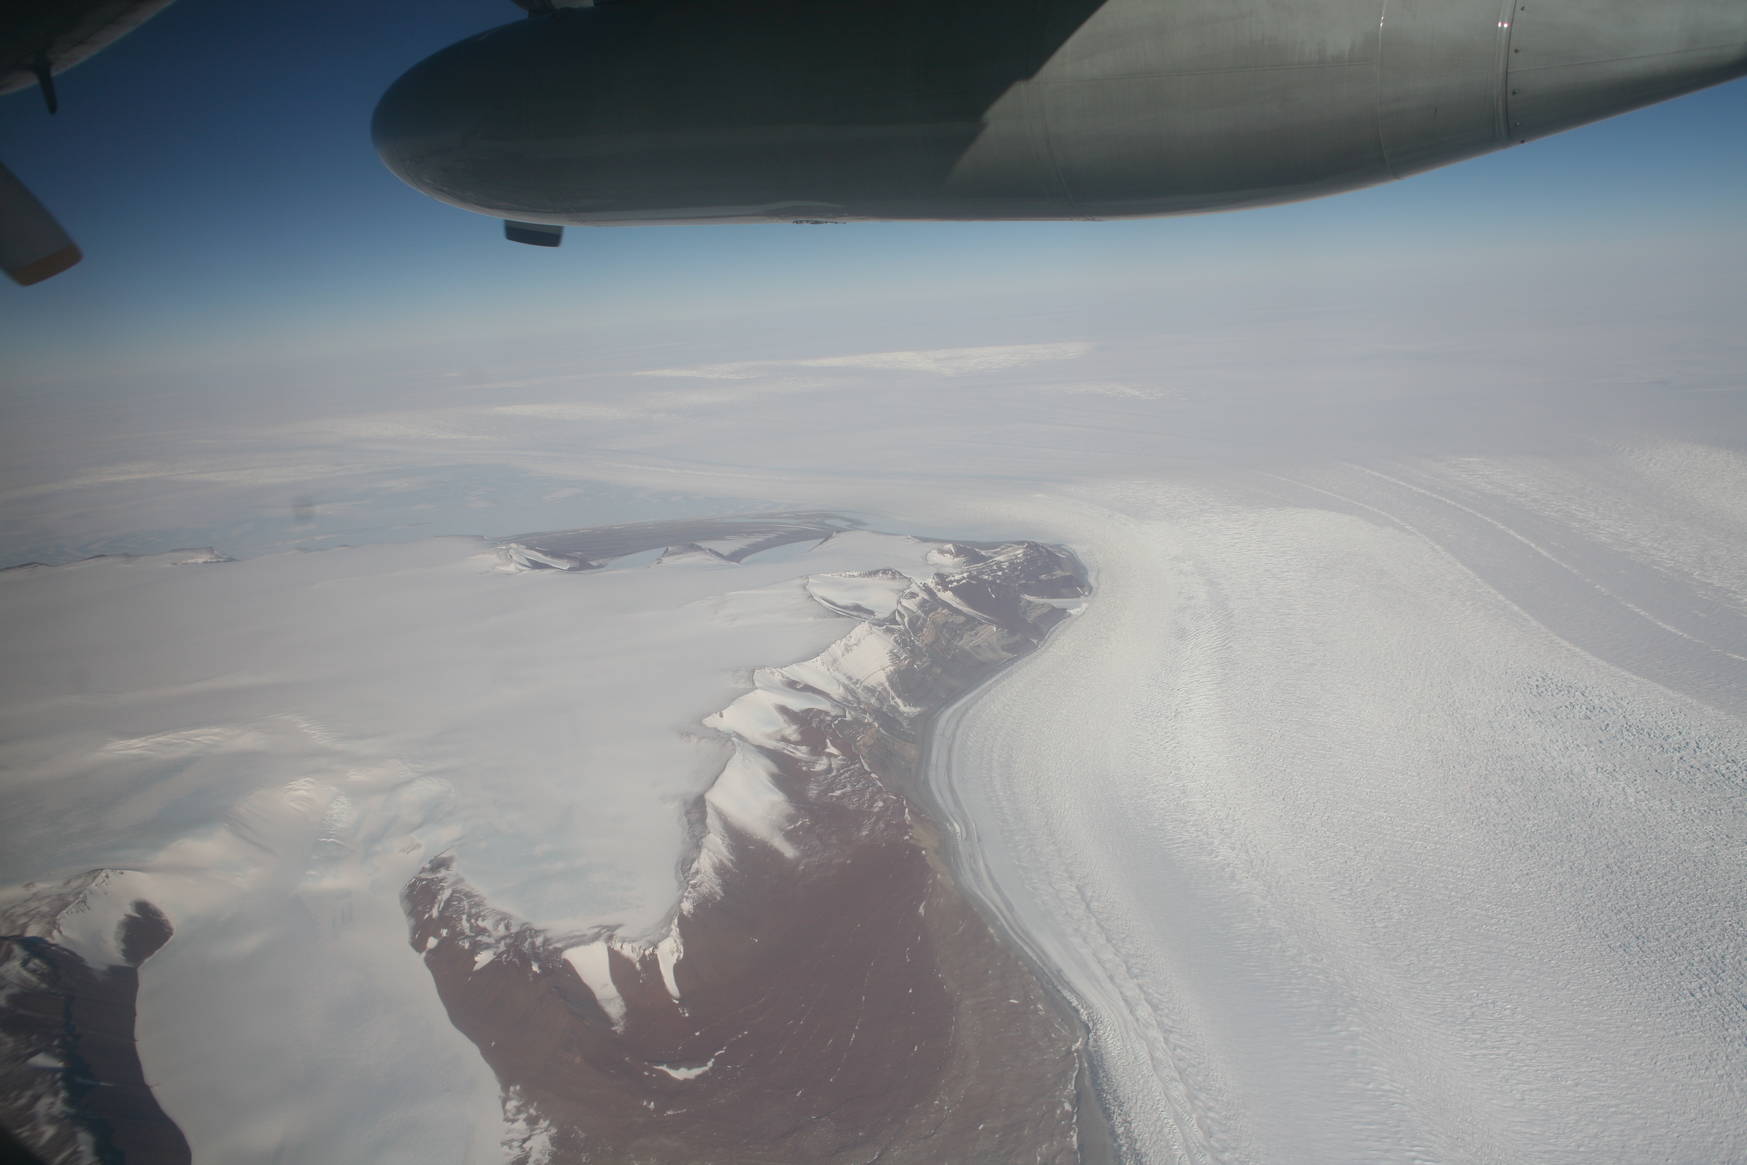 Trans-Antarctic mountains seen from the airplane.